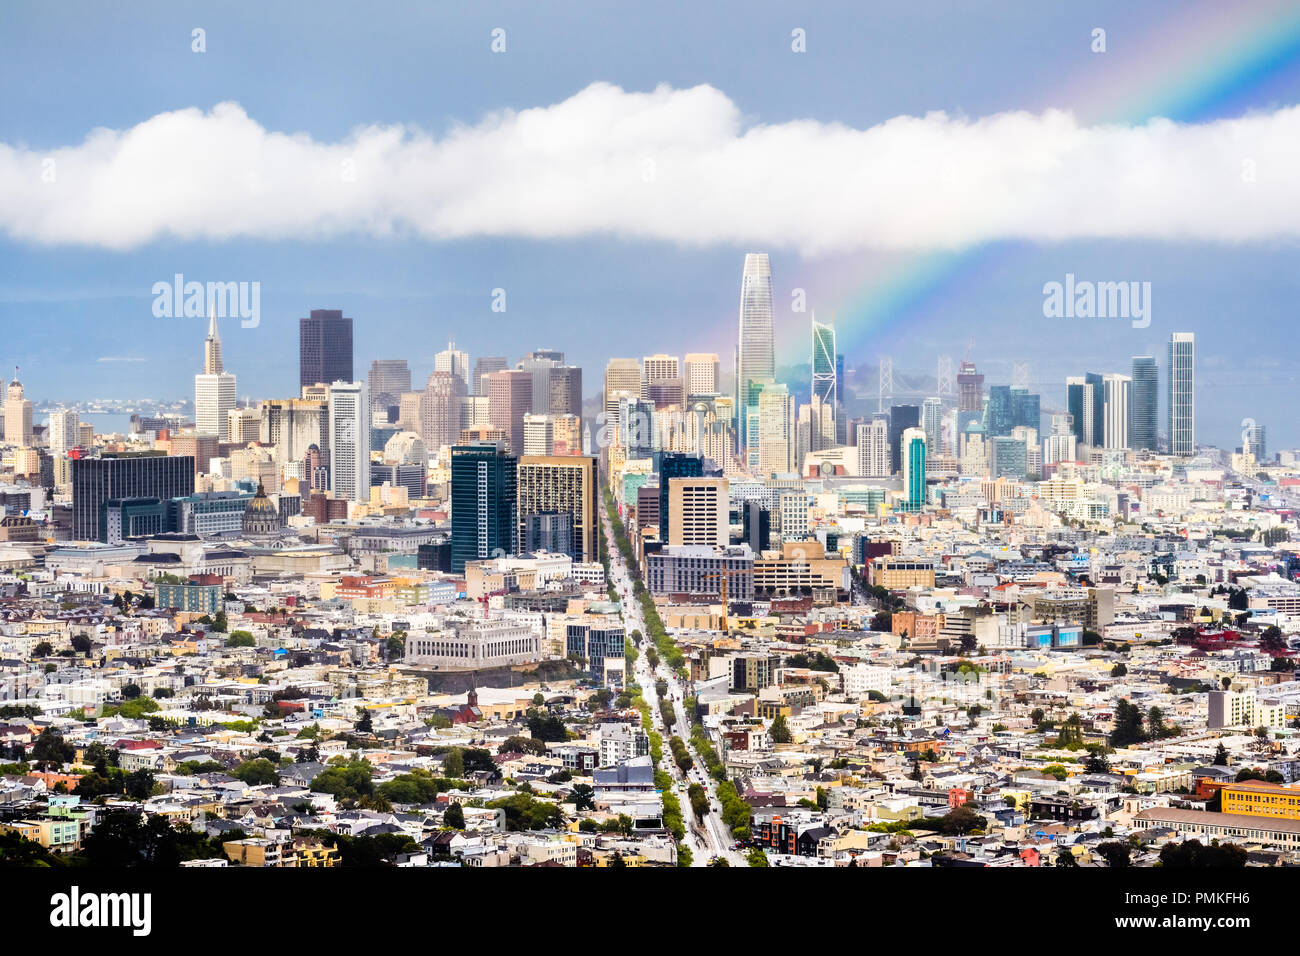 Aerial view of San Francisco's financial district skyline on a rainy day, bright rainbow rising from downtown; Stock Photo